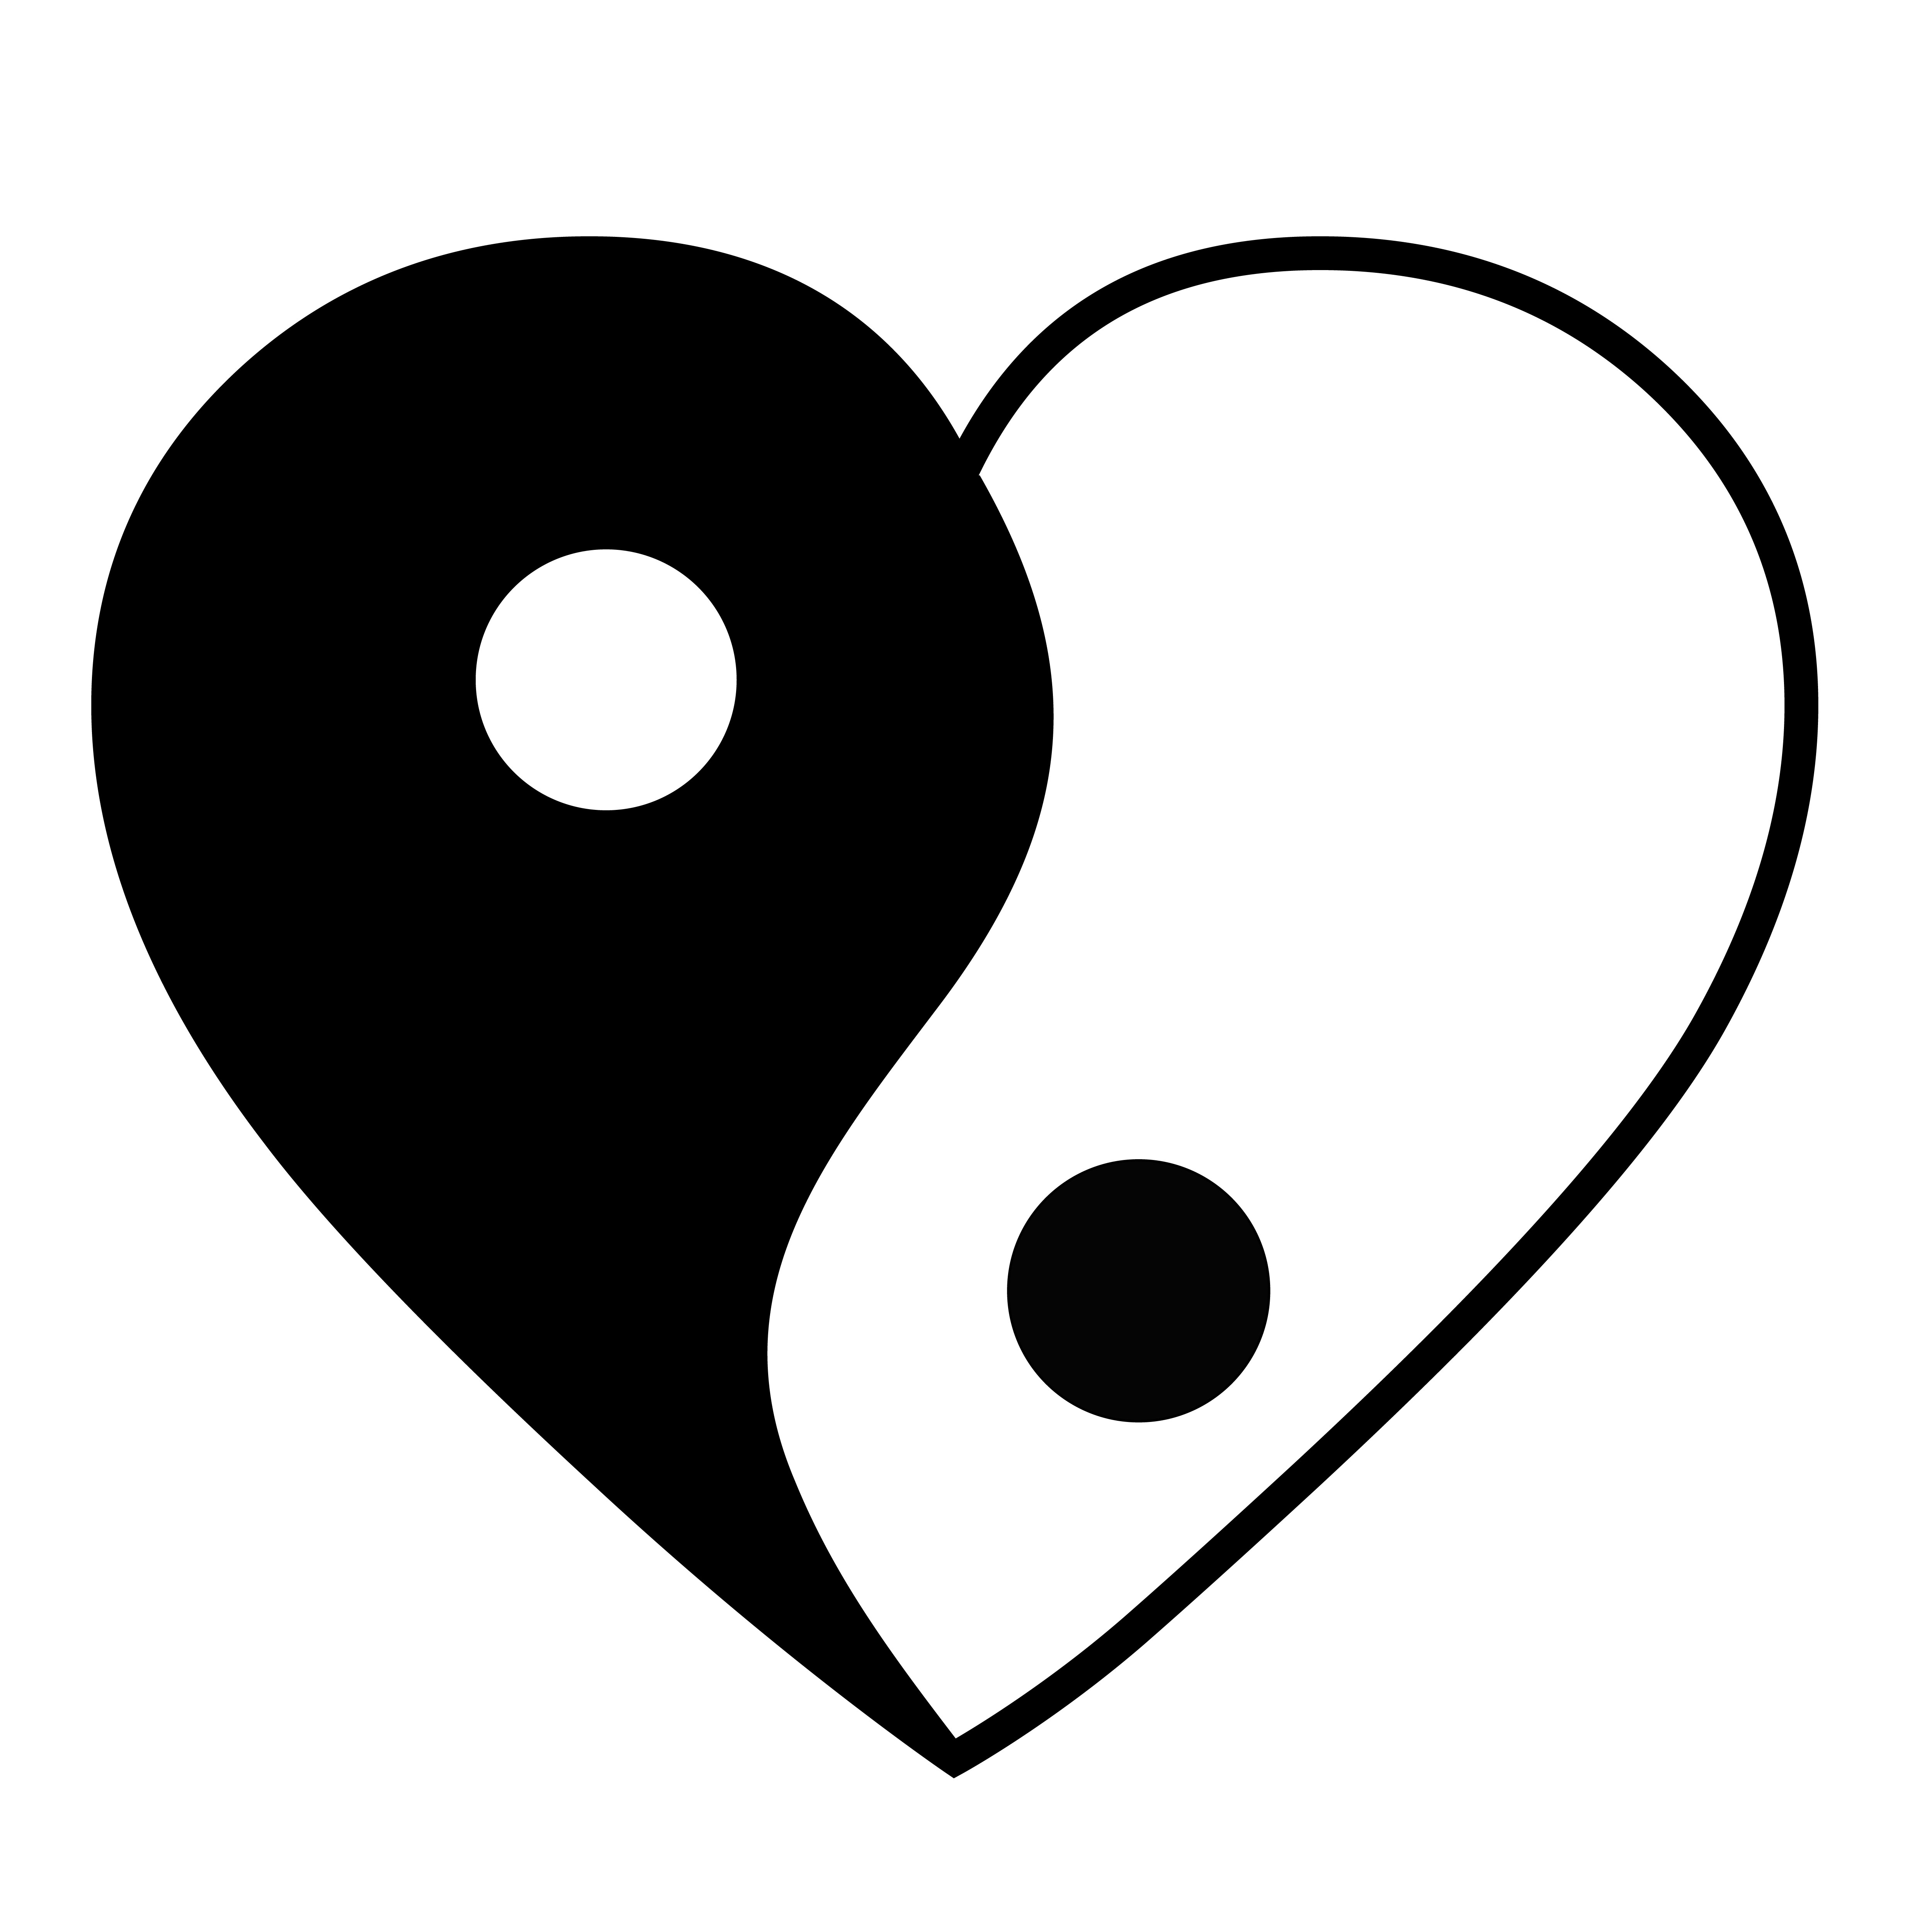 Cold Hearts Do Exist: It's for the Yin and Yang of It ...